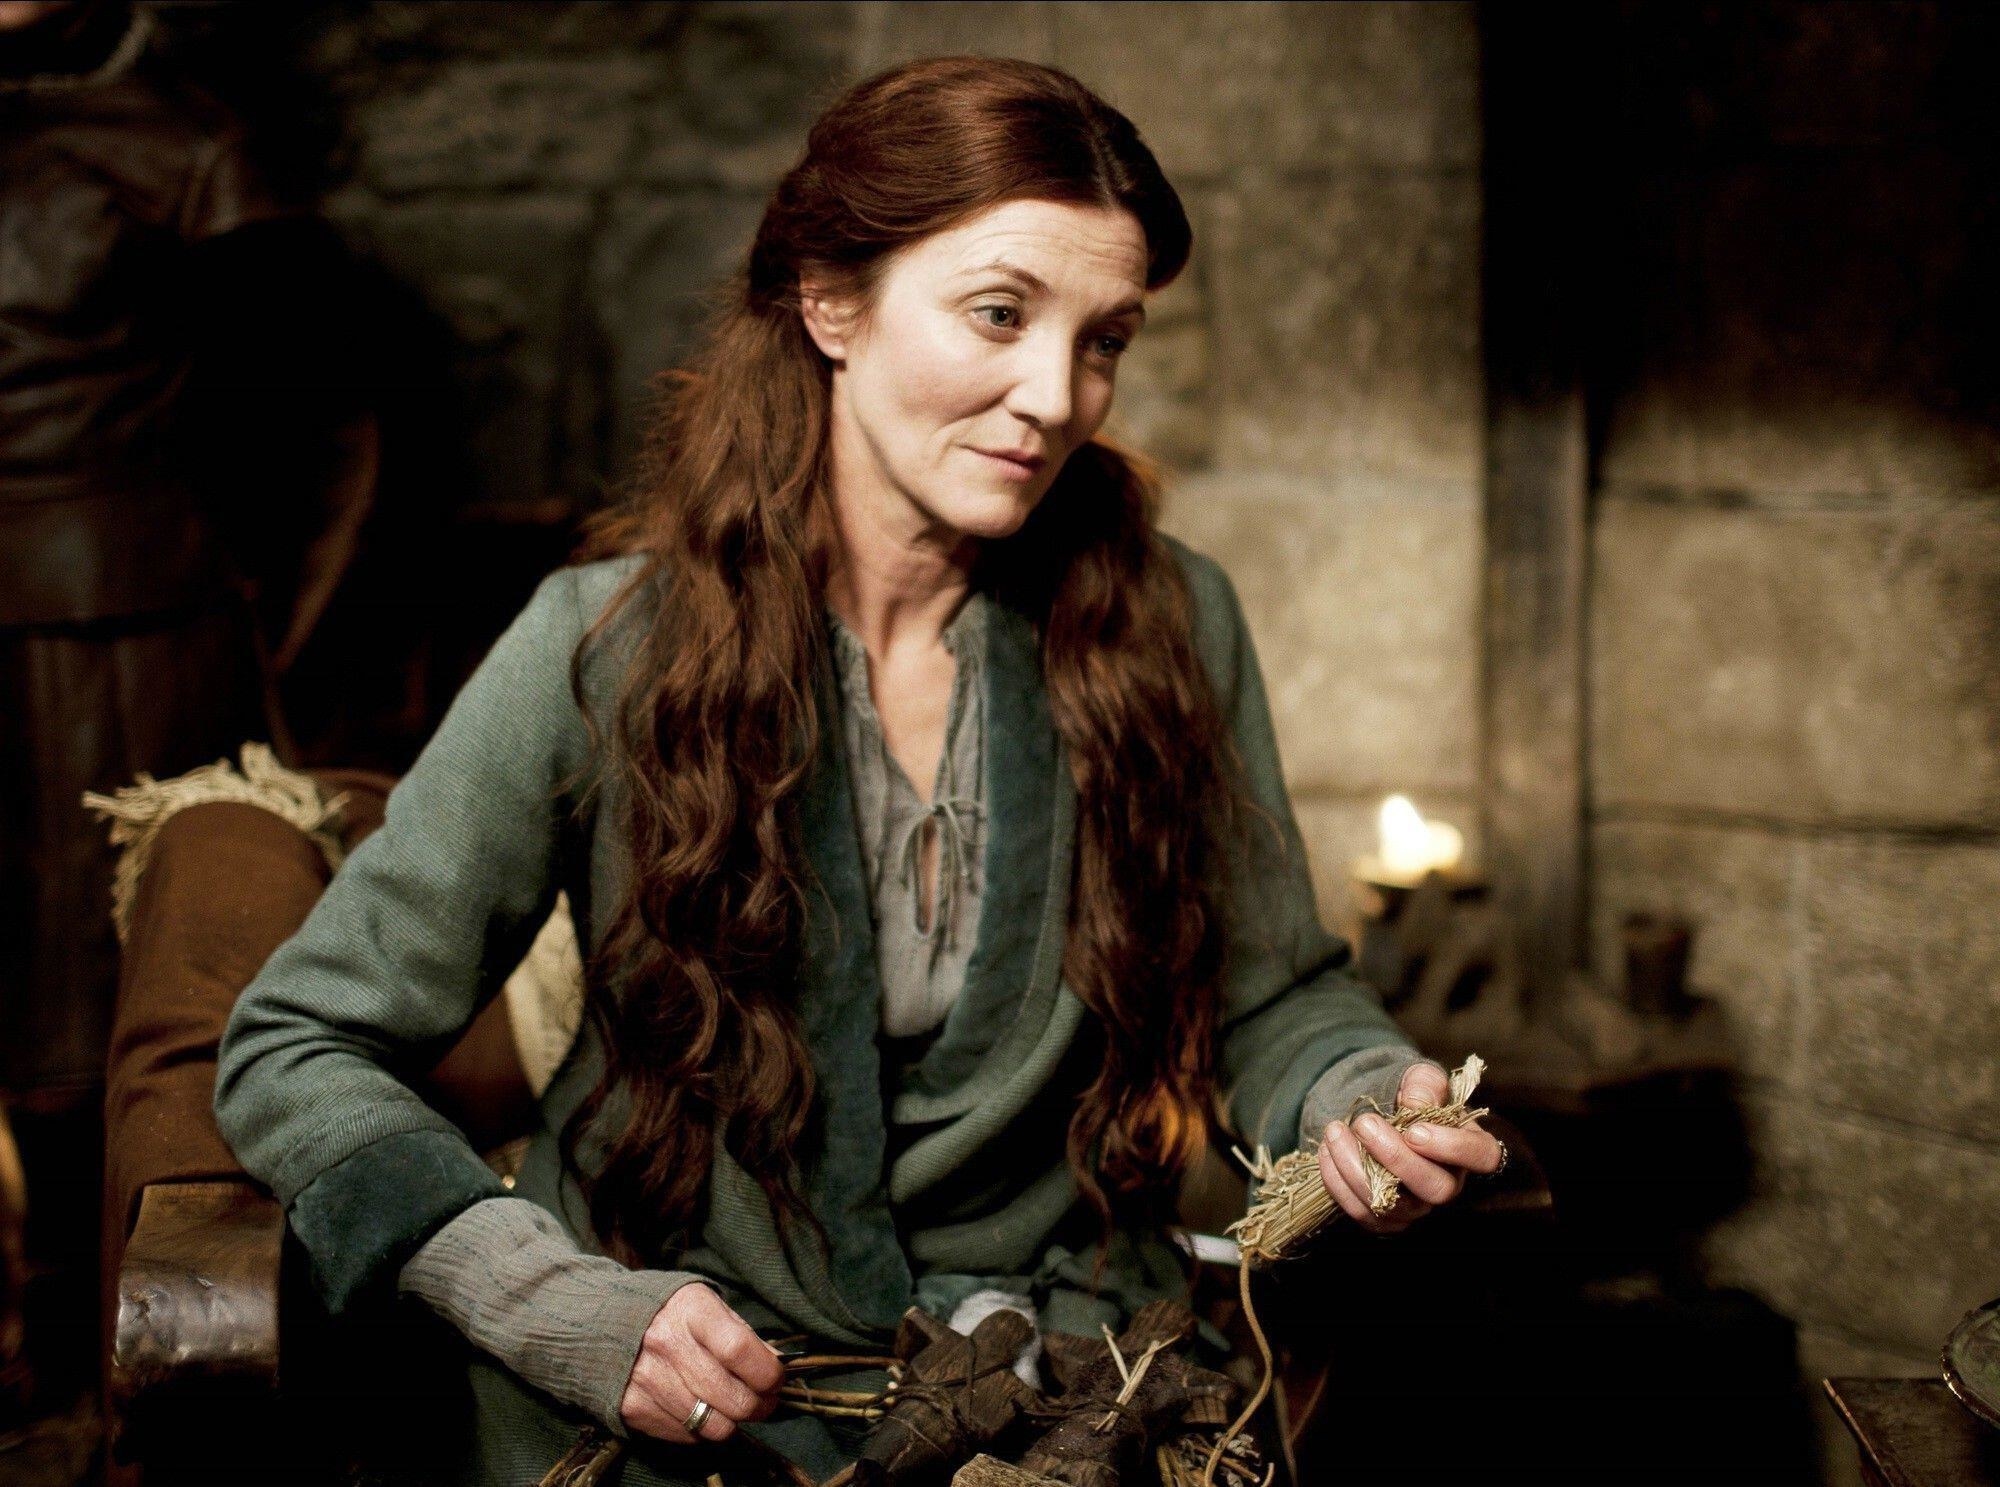 Michelle Fairley as Catelyn Stark in &quot;Game of Thrones&quot;